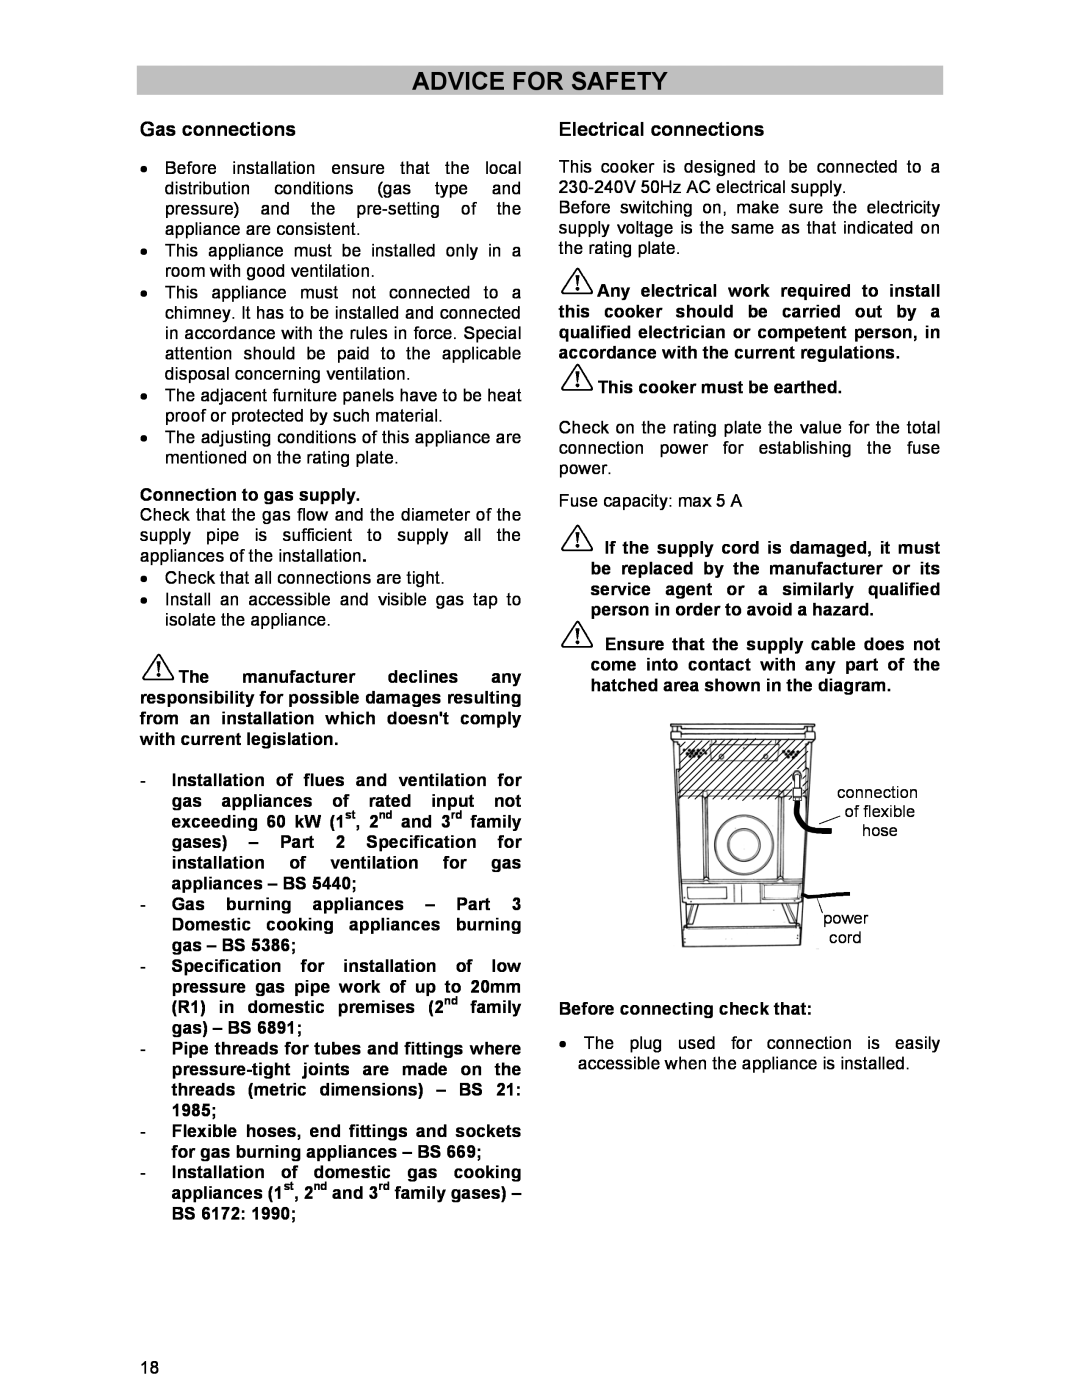 Electrolux DSO51GA manual Advice For Safety, Gas connections, Electrical connections 